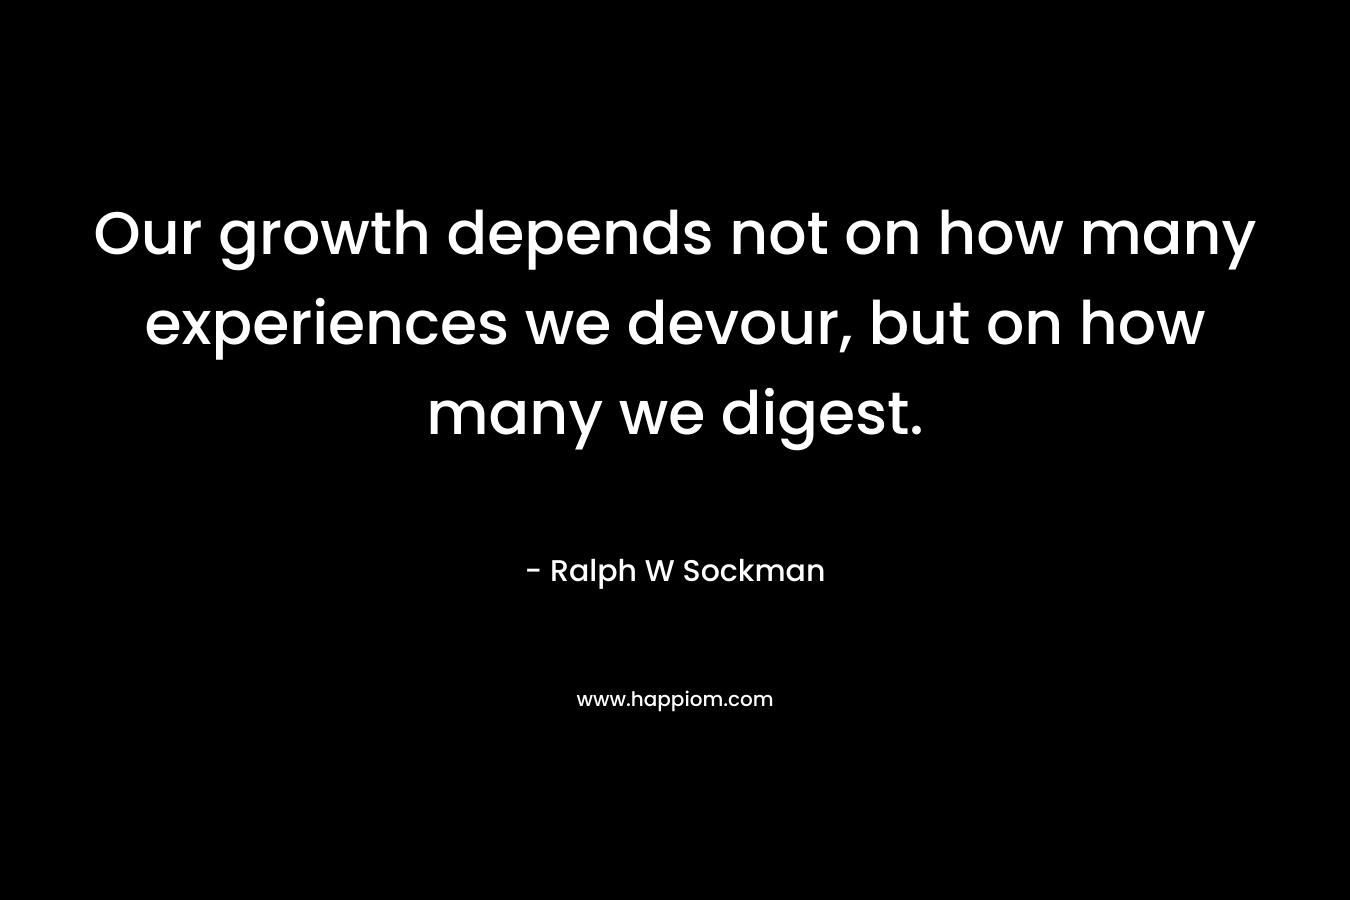 Our growth depends not on how many experiences we devour, but on how many we digest. – Ralph W Sockman